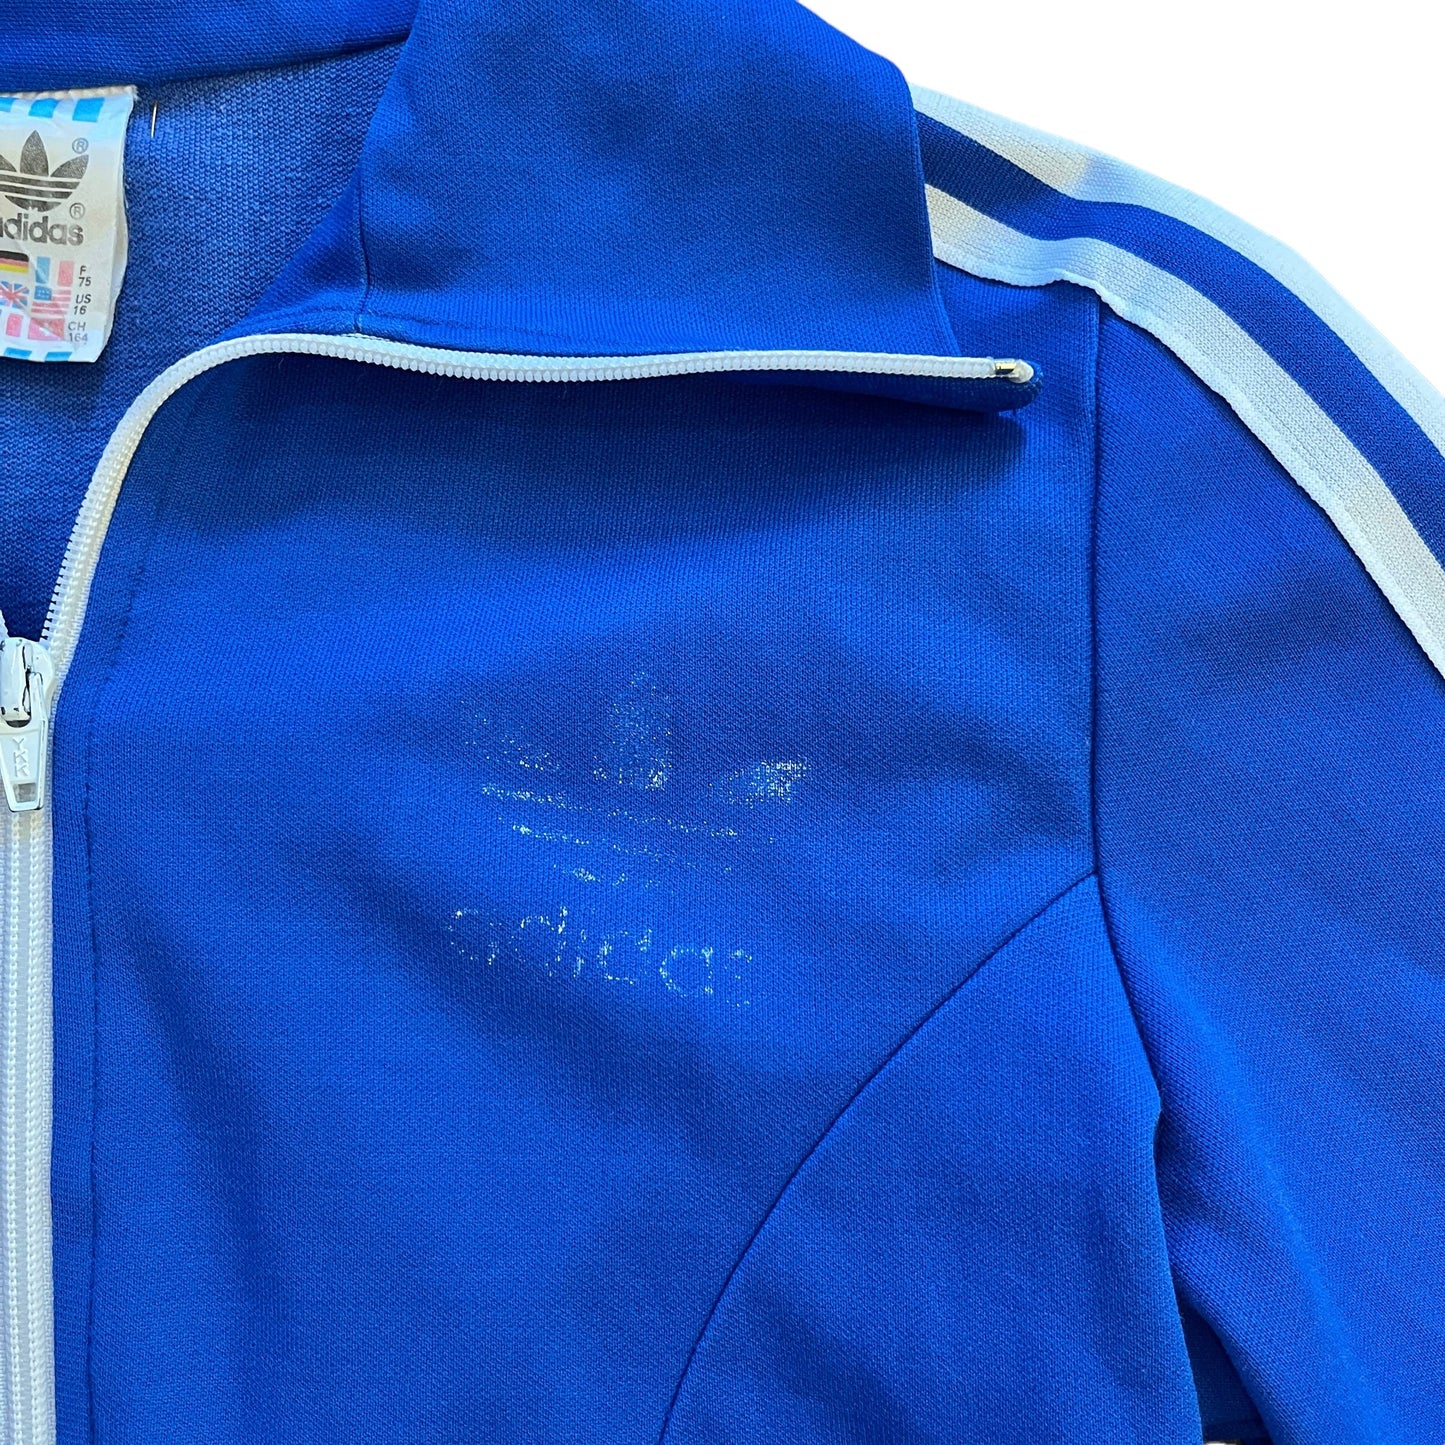 Vintage 1990s Adidas Zipper Jacket / 10-12 Years and over